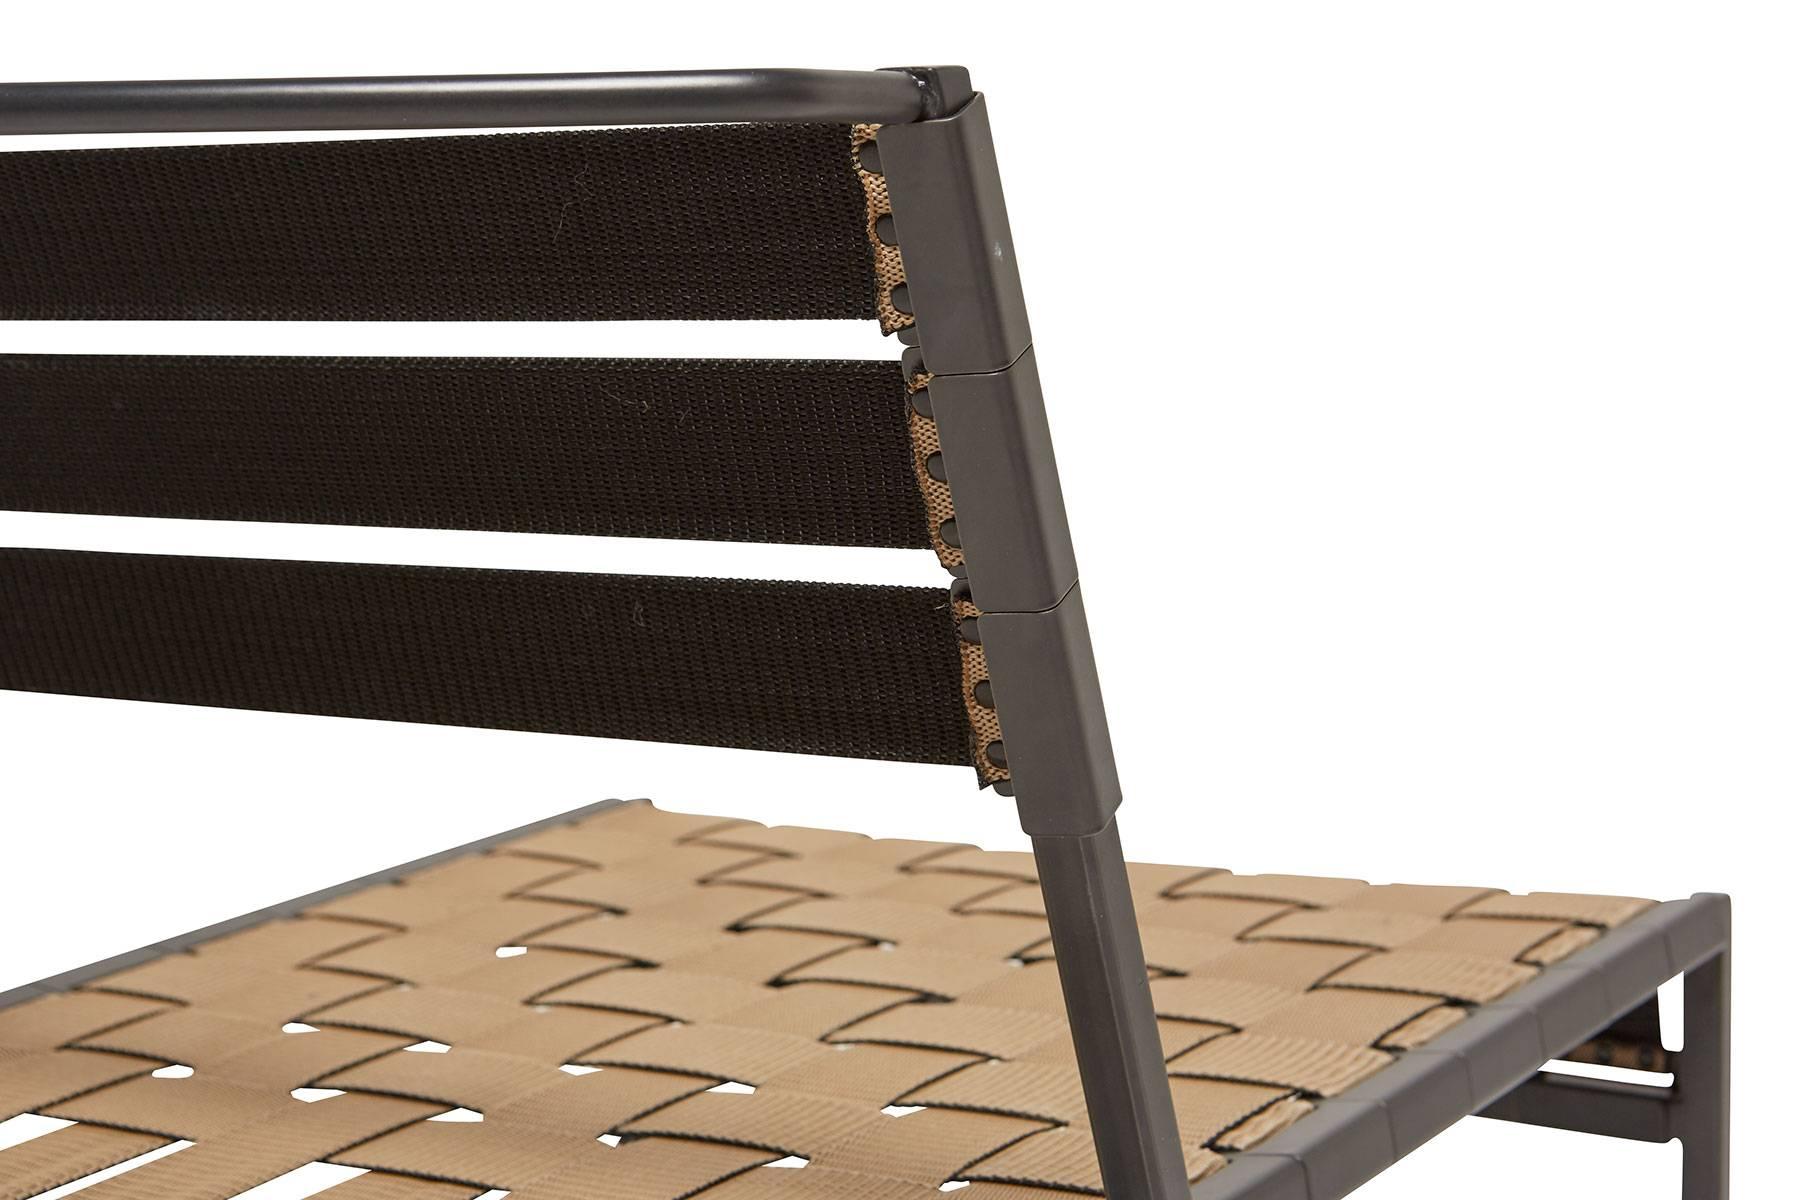 Powder-Coated Tan & Charcoal Outdoor Lounge Chair For Sale